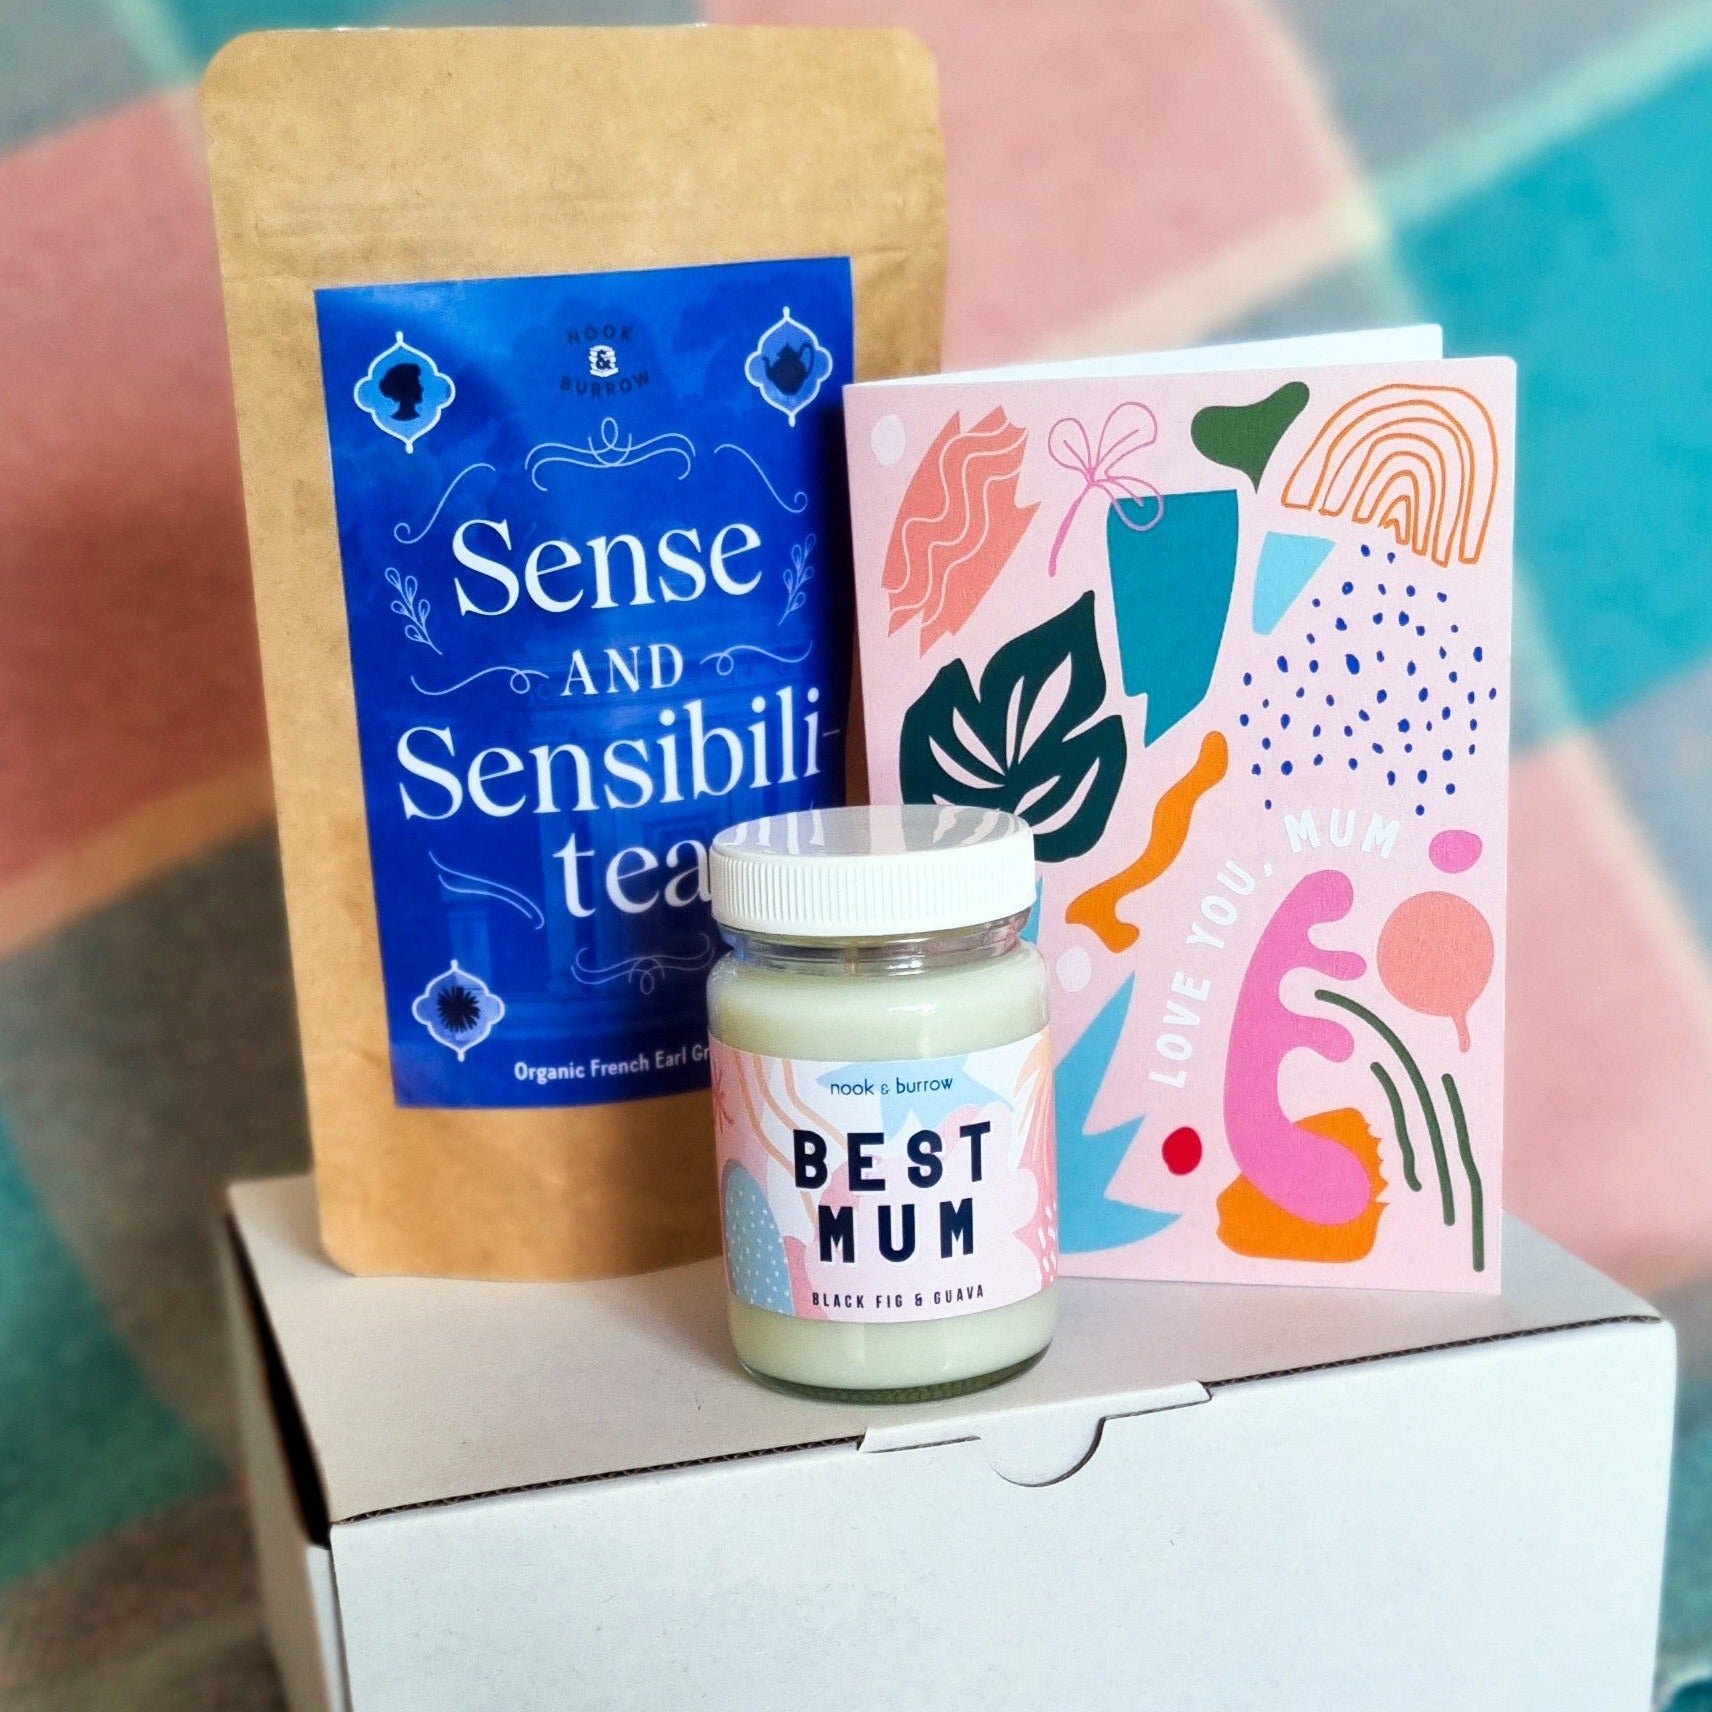 Best Mum Gift Box with a pack of loose leaf tea, tea strainer, best mum candle and designed greeting card that says 'Love you, Mum'